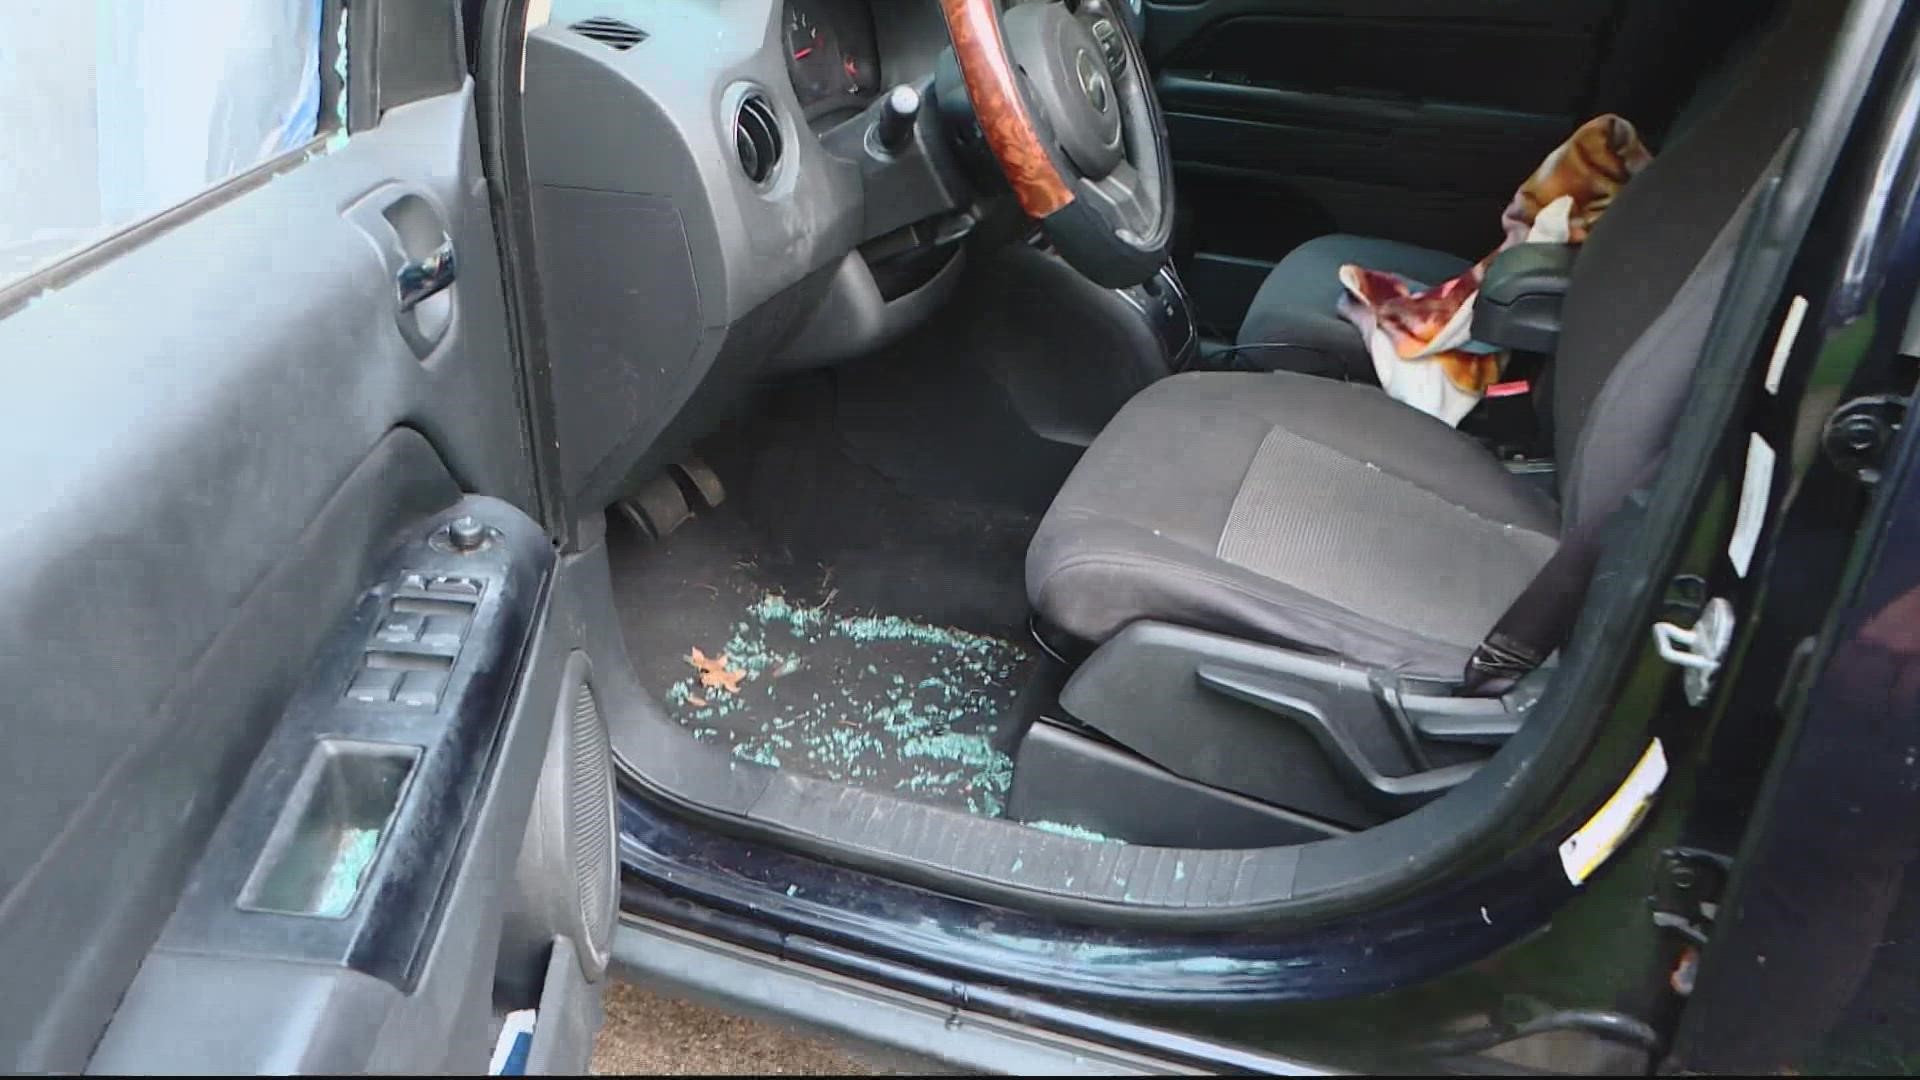 Between the evening of Oct. 20 and the early morning hours of Oct. 21, the windows of 23 vehicles were smashed.